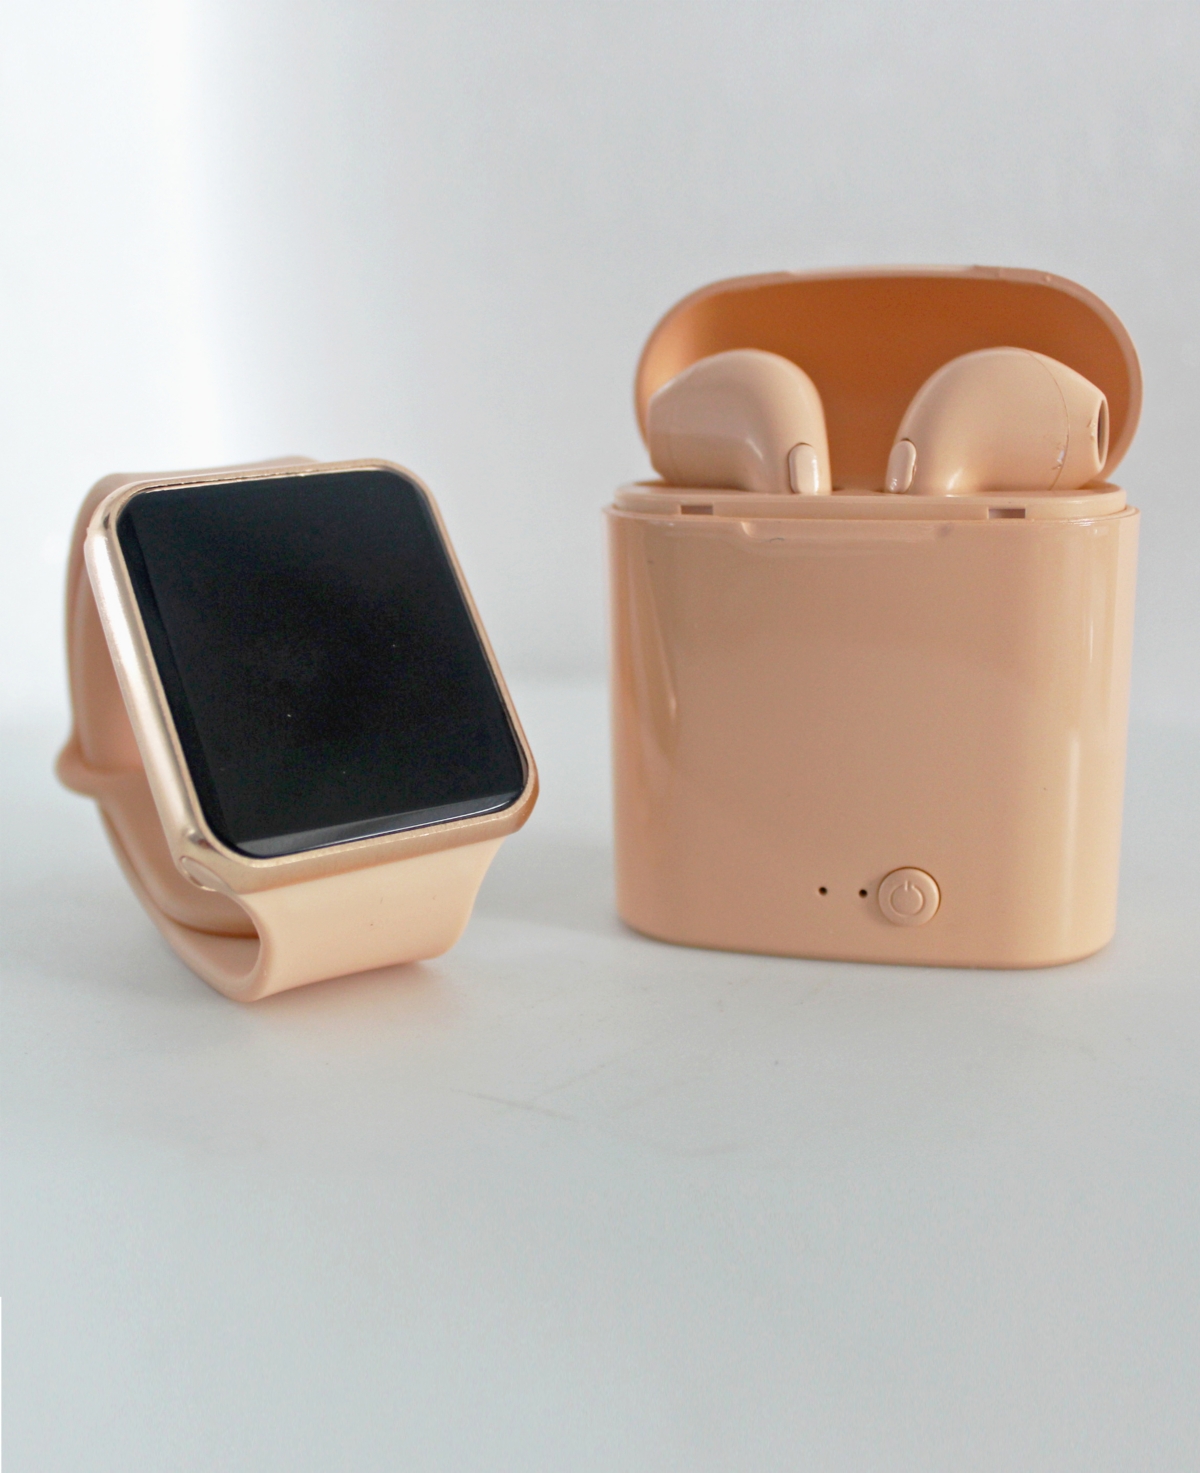 Unisex Led Touch Watch and Wireless Headphones with Portable Charging Case Set - Blush Watch Strap/rose Gold Watch Case/b